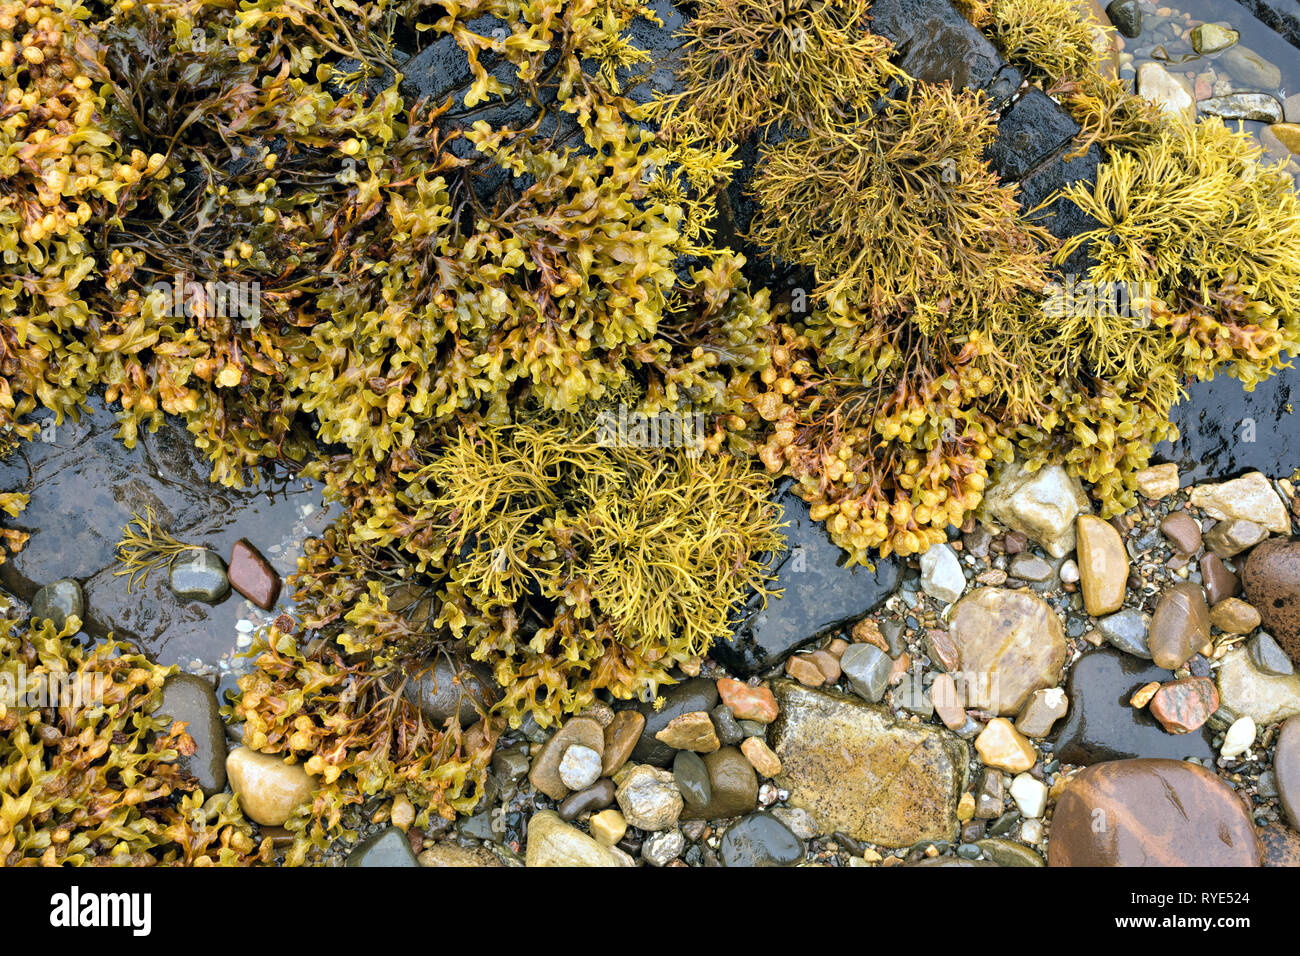 Channelled wrack and Spiral wrack seaweed growing on a rocky Scottish Beach, Scotland, UK Stock Photo